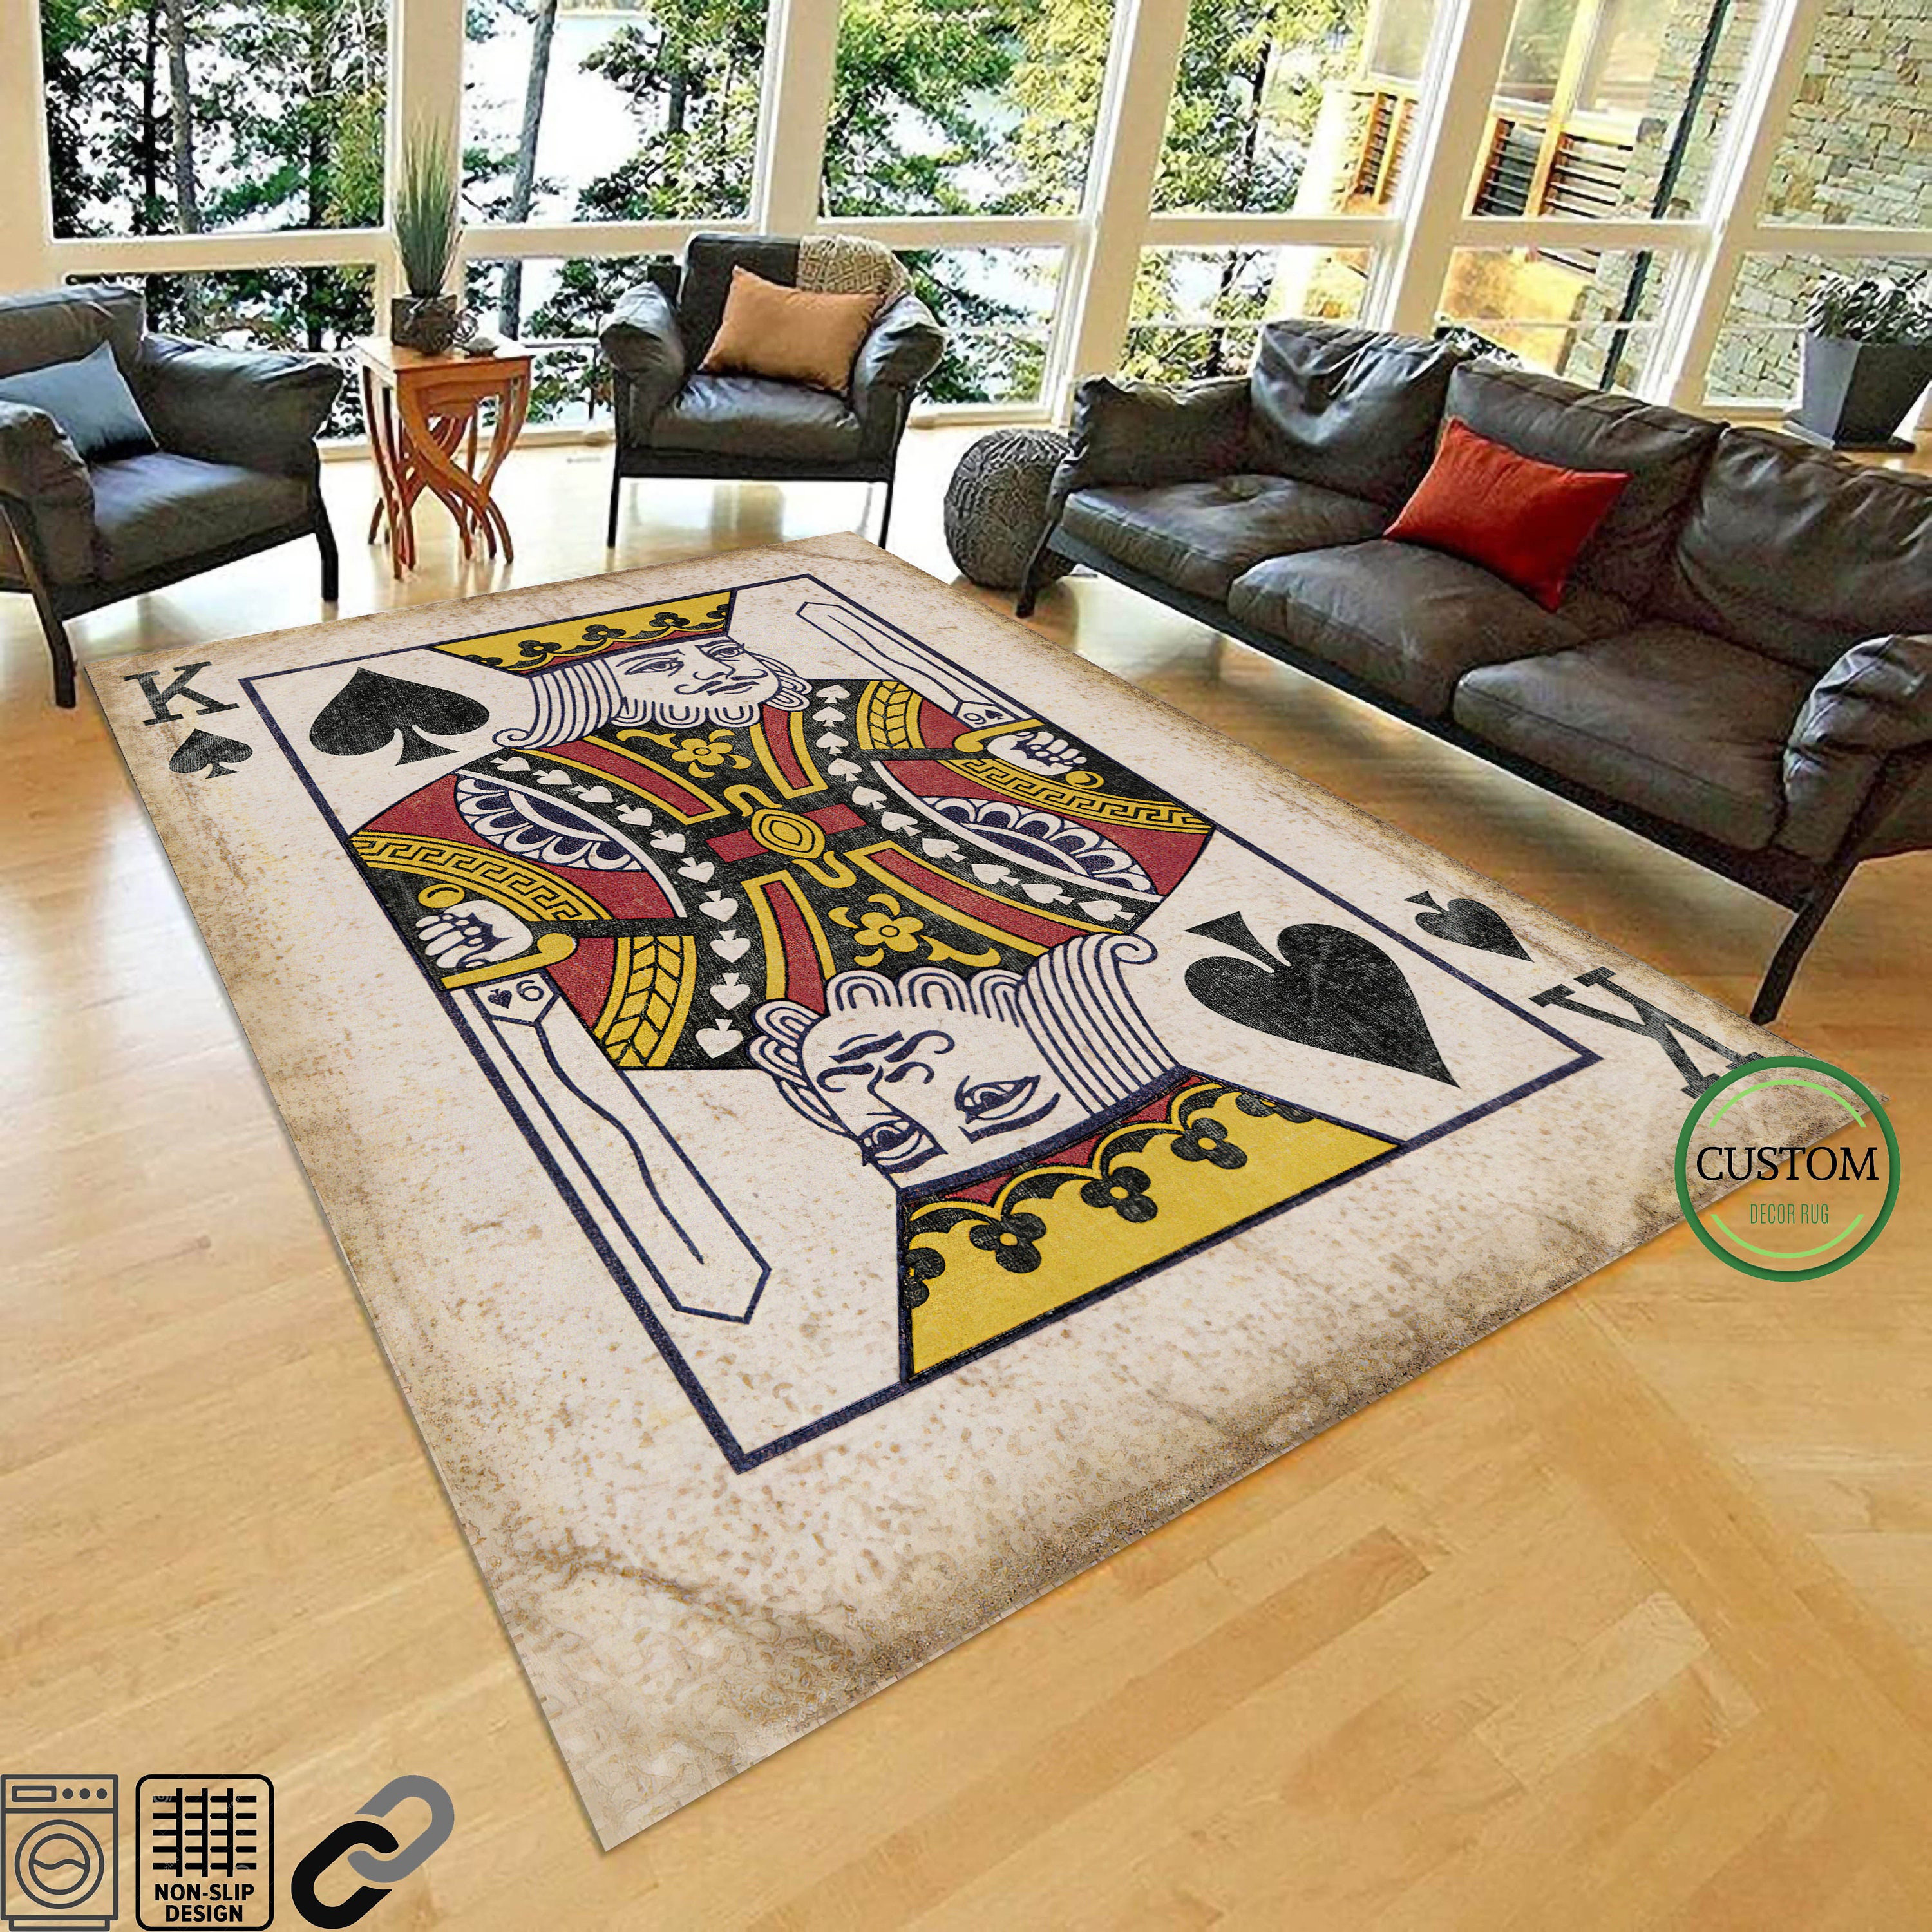 Playing Cards Rug, King Card Design Rug, Play Card Rug, Personalized Gift ,  Fashion Rug, Gift For Him Her, Home Decoration, For Living Room